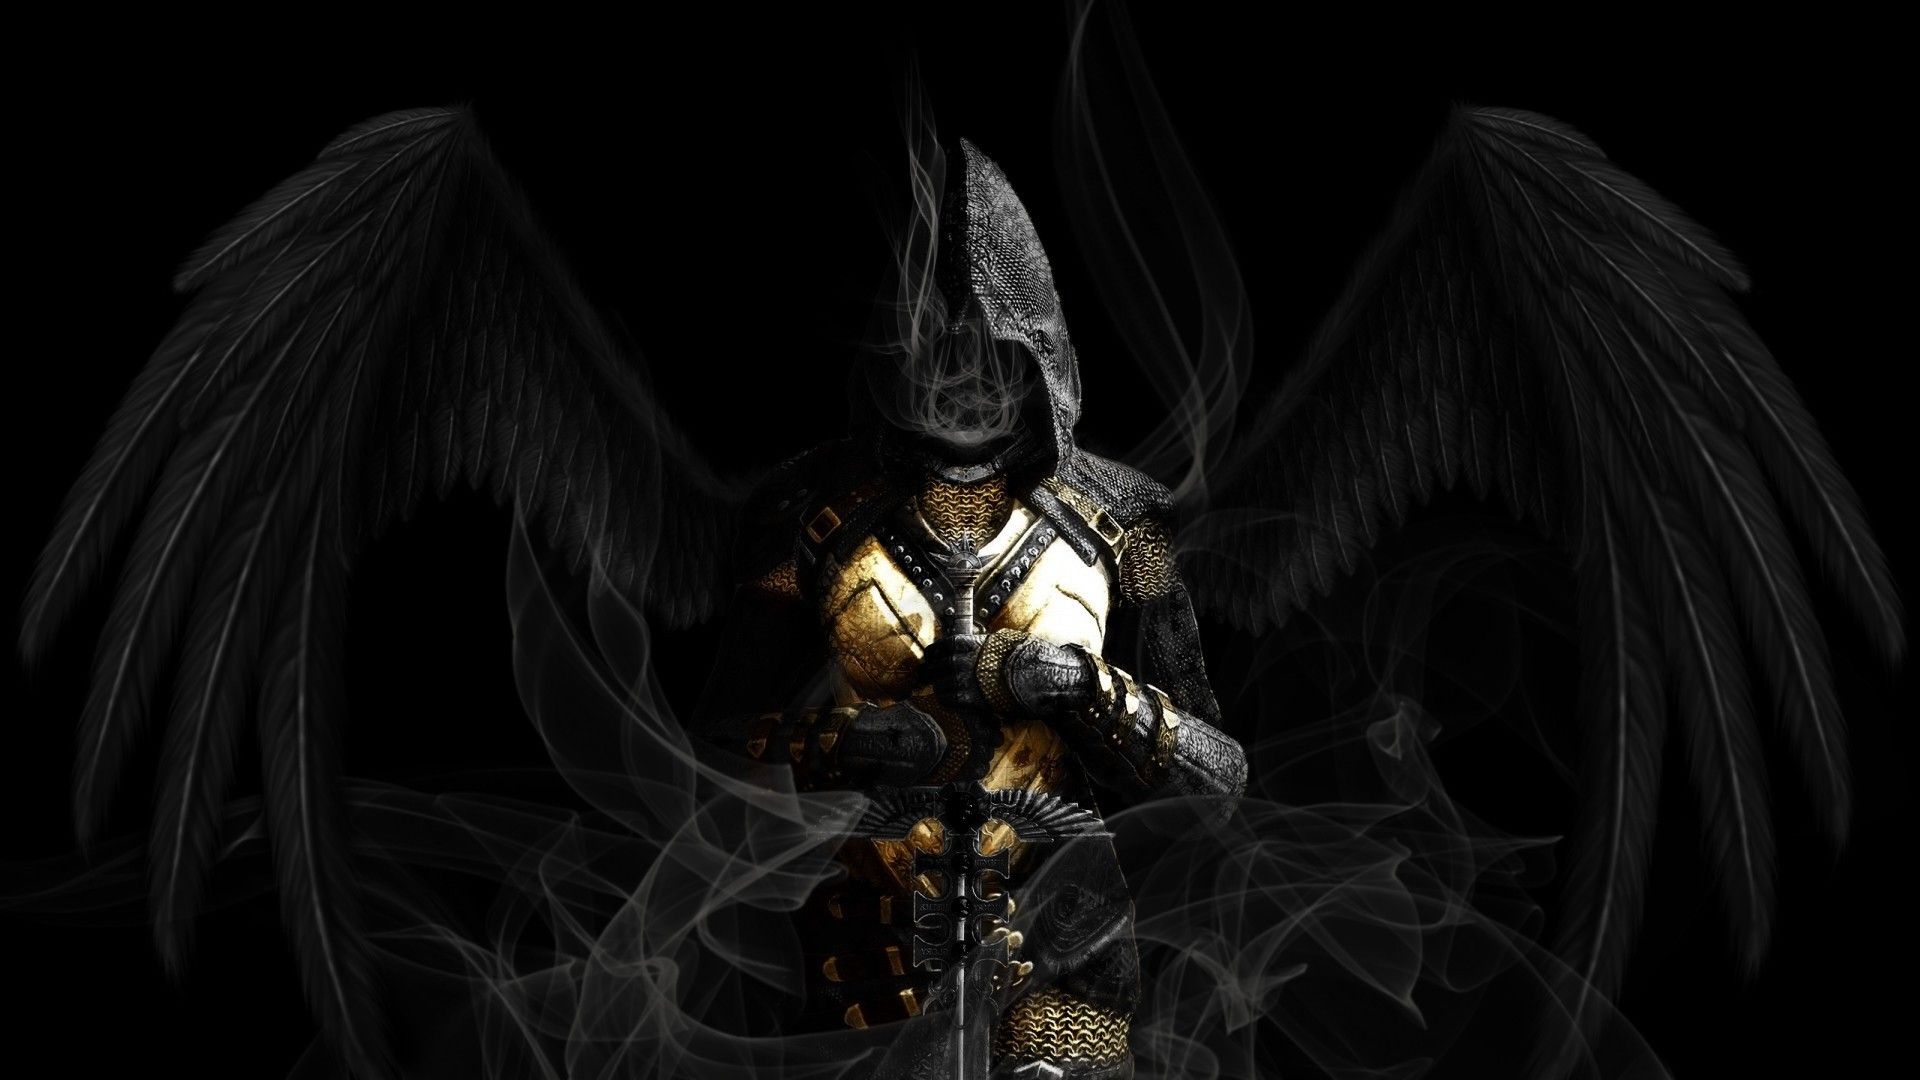 St. Michael Smartphone Backgrounds - Thy Geekdom Come